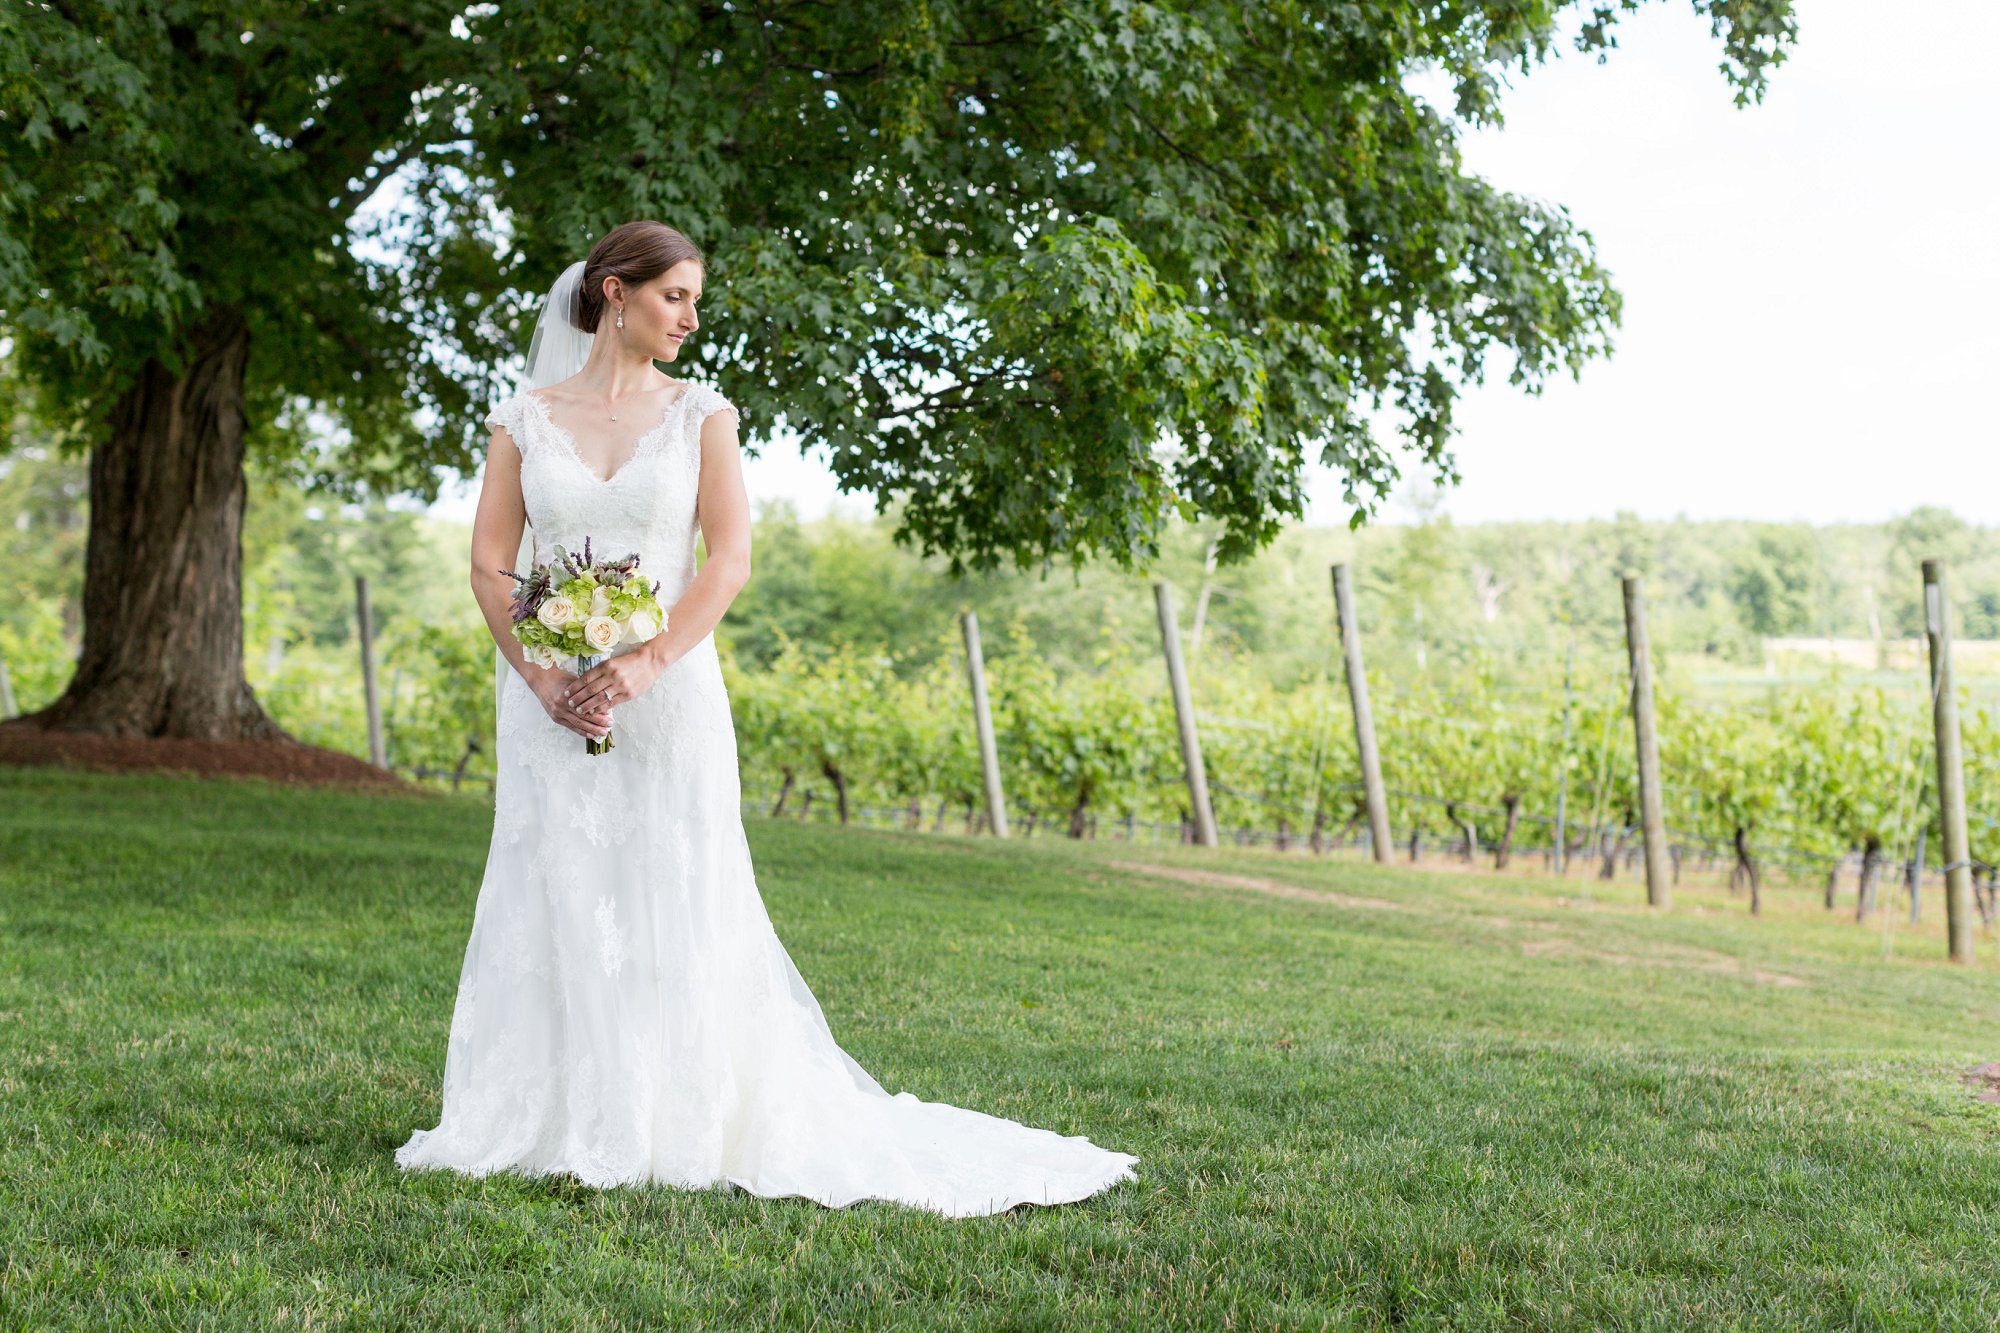 Bridal portraits at Flag Hill Winery, Lee NH | New Hampshire Wedding Photographer